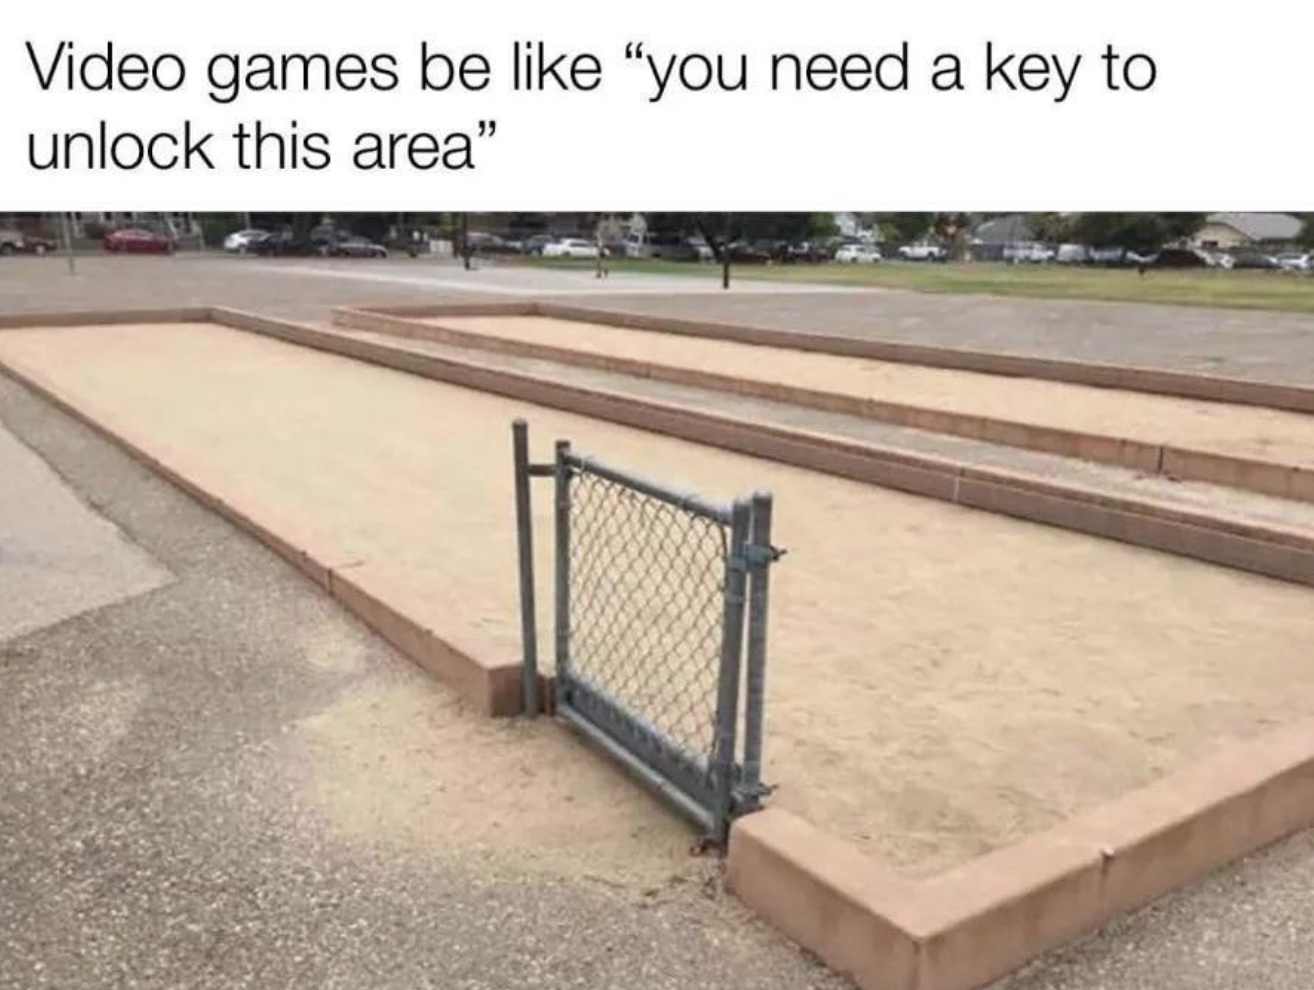 funny gaming memes - video games be like you need a key to unlock this area - Video games be "you need a key to unlock this area"